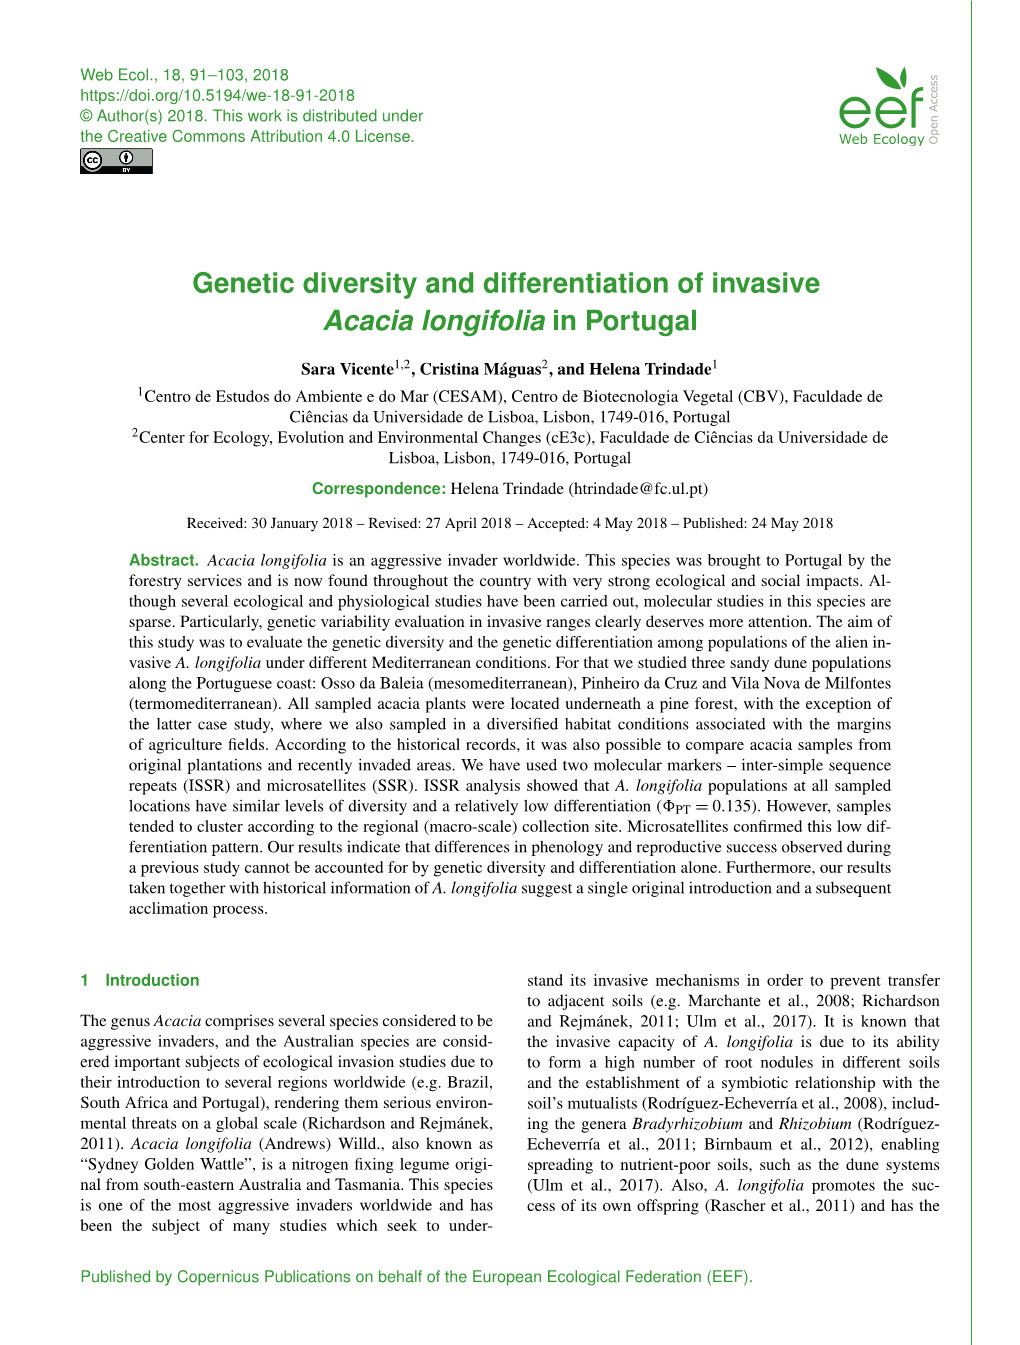 Genetic Diversity and Differentiation of Invasive Acacia Longifolia in Portugal